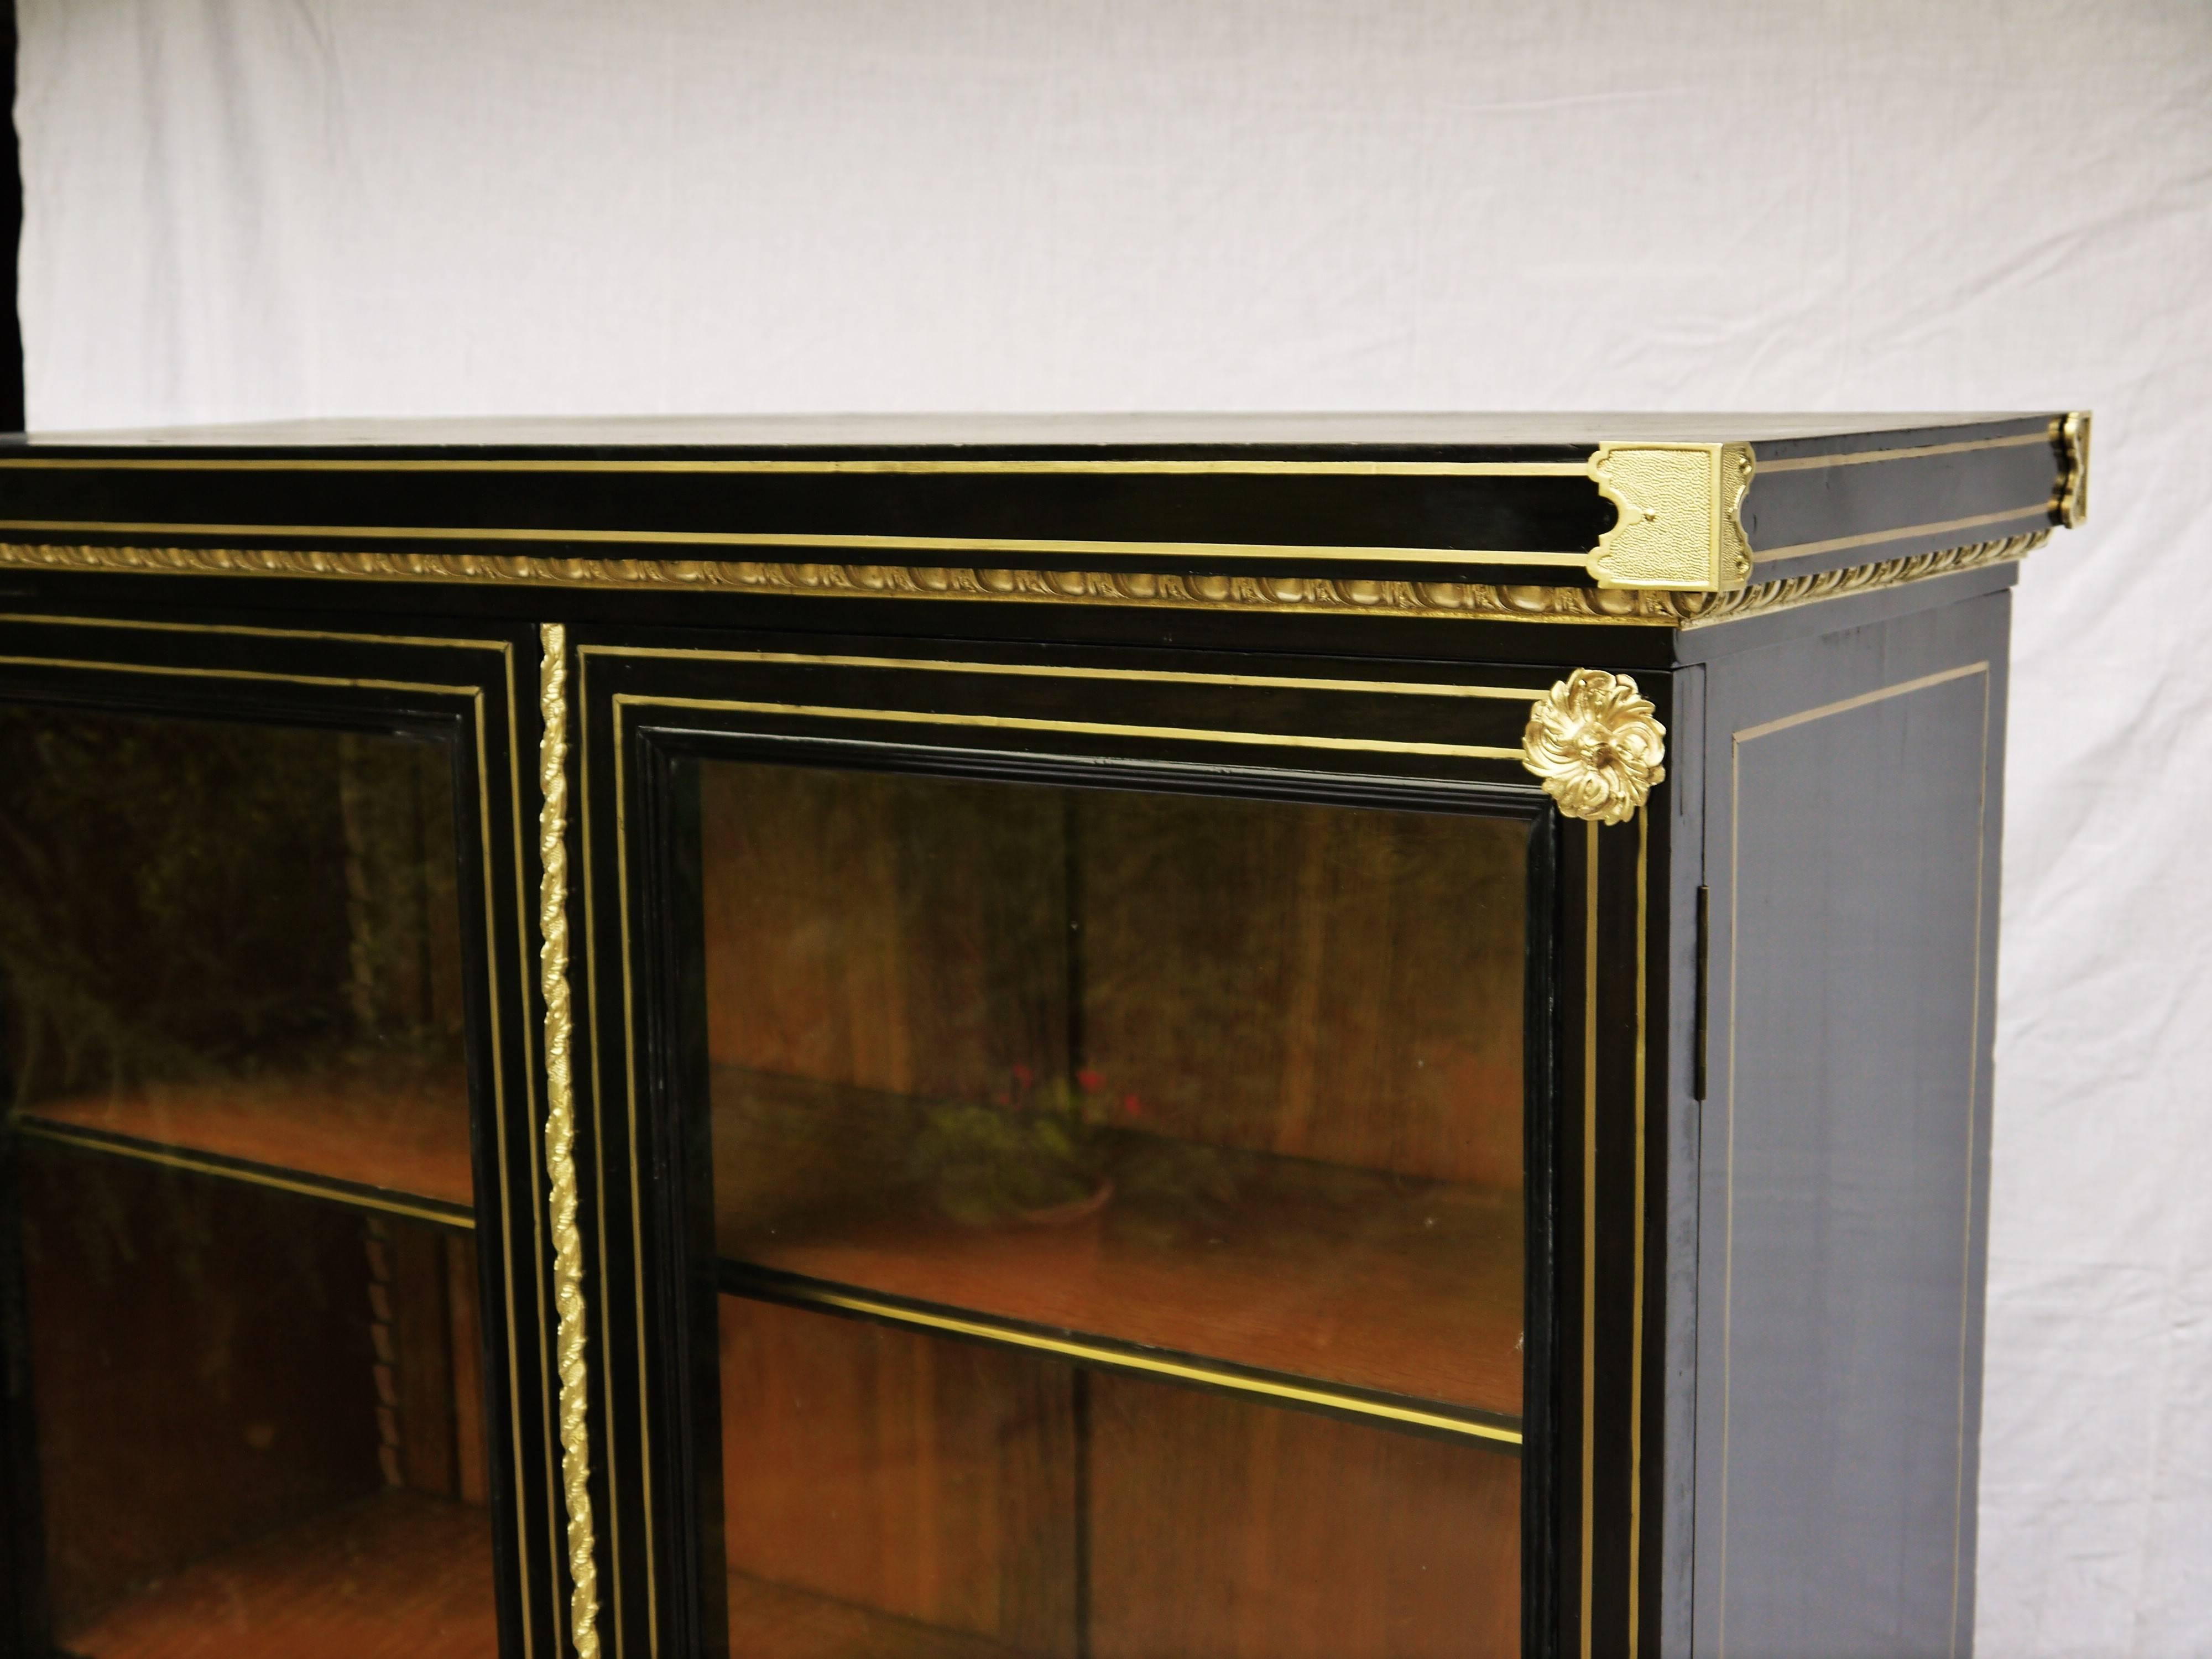 Elegant Bibliotheque, showcase, bookcase vitrine cabinet in Napoleon III style. Blackened wood decorated with Boule style marquetry with brass filets with two glass doors.
High quality gilt bronze ornamentations. The inside parts are in palisander